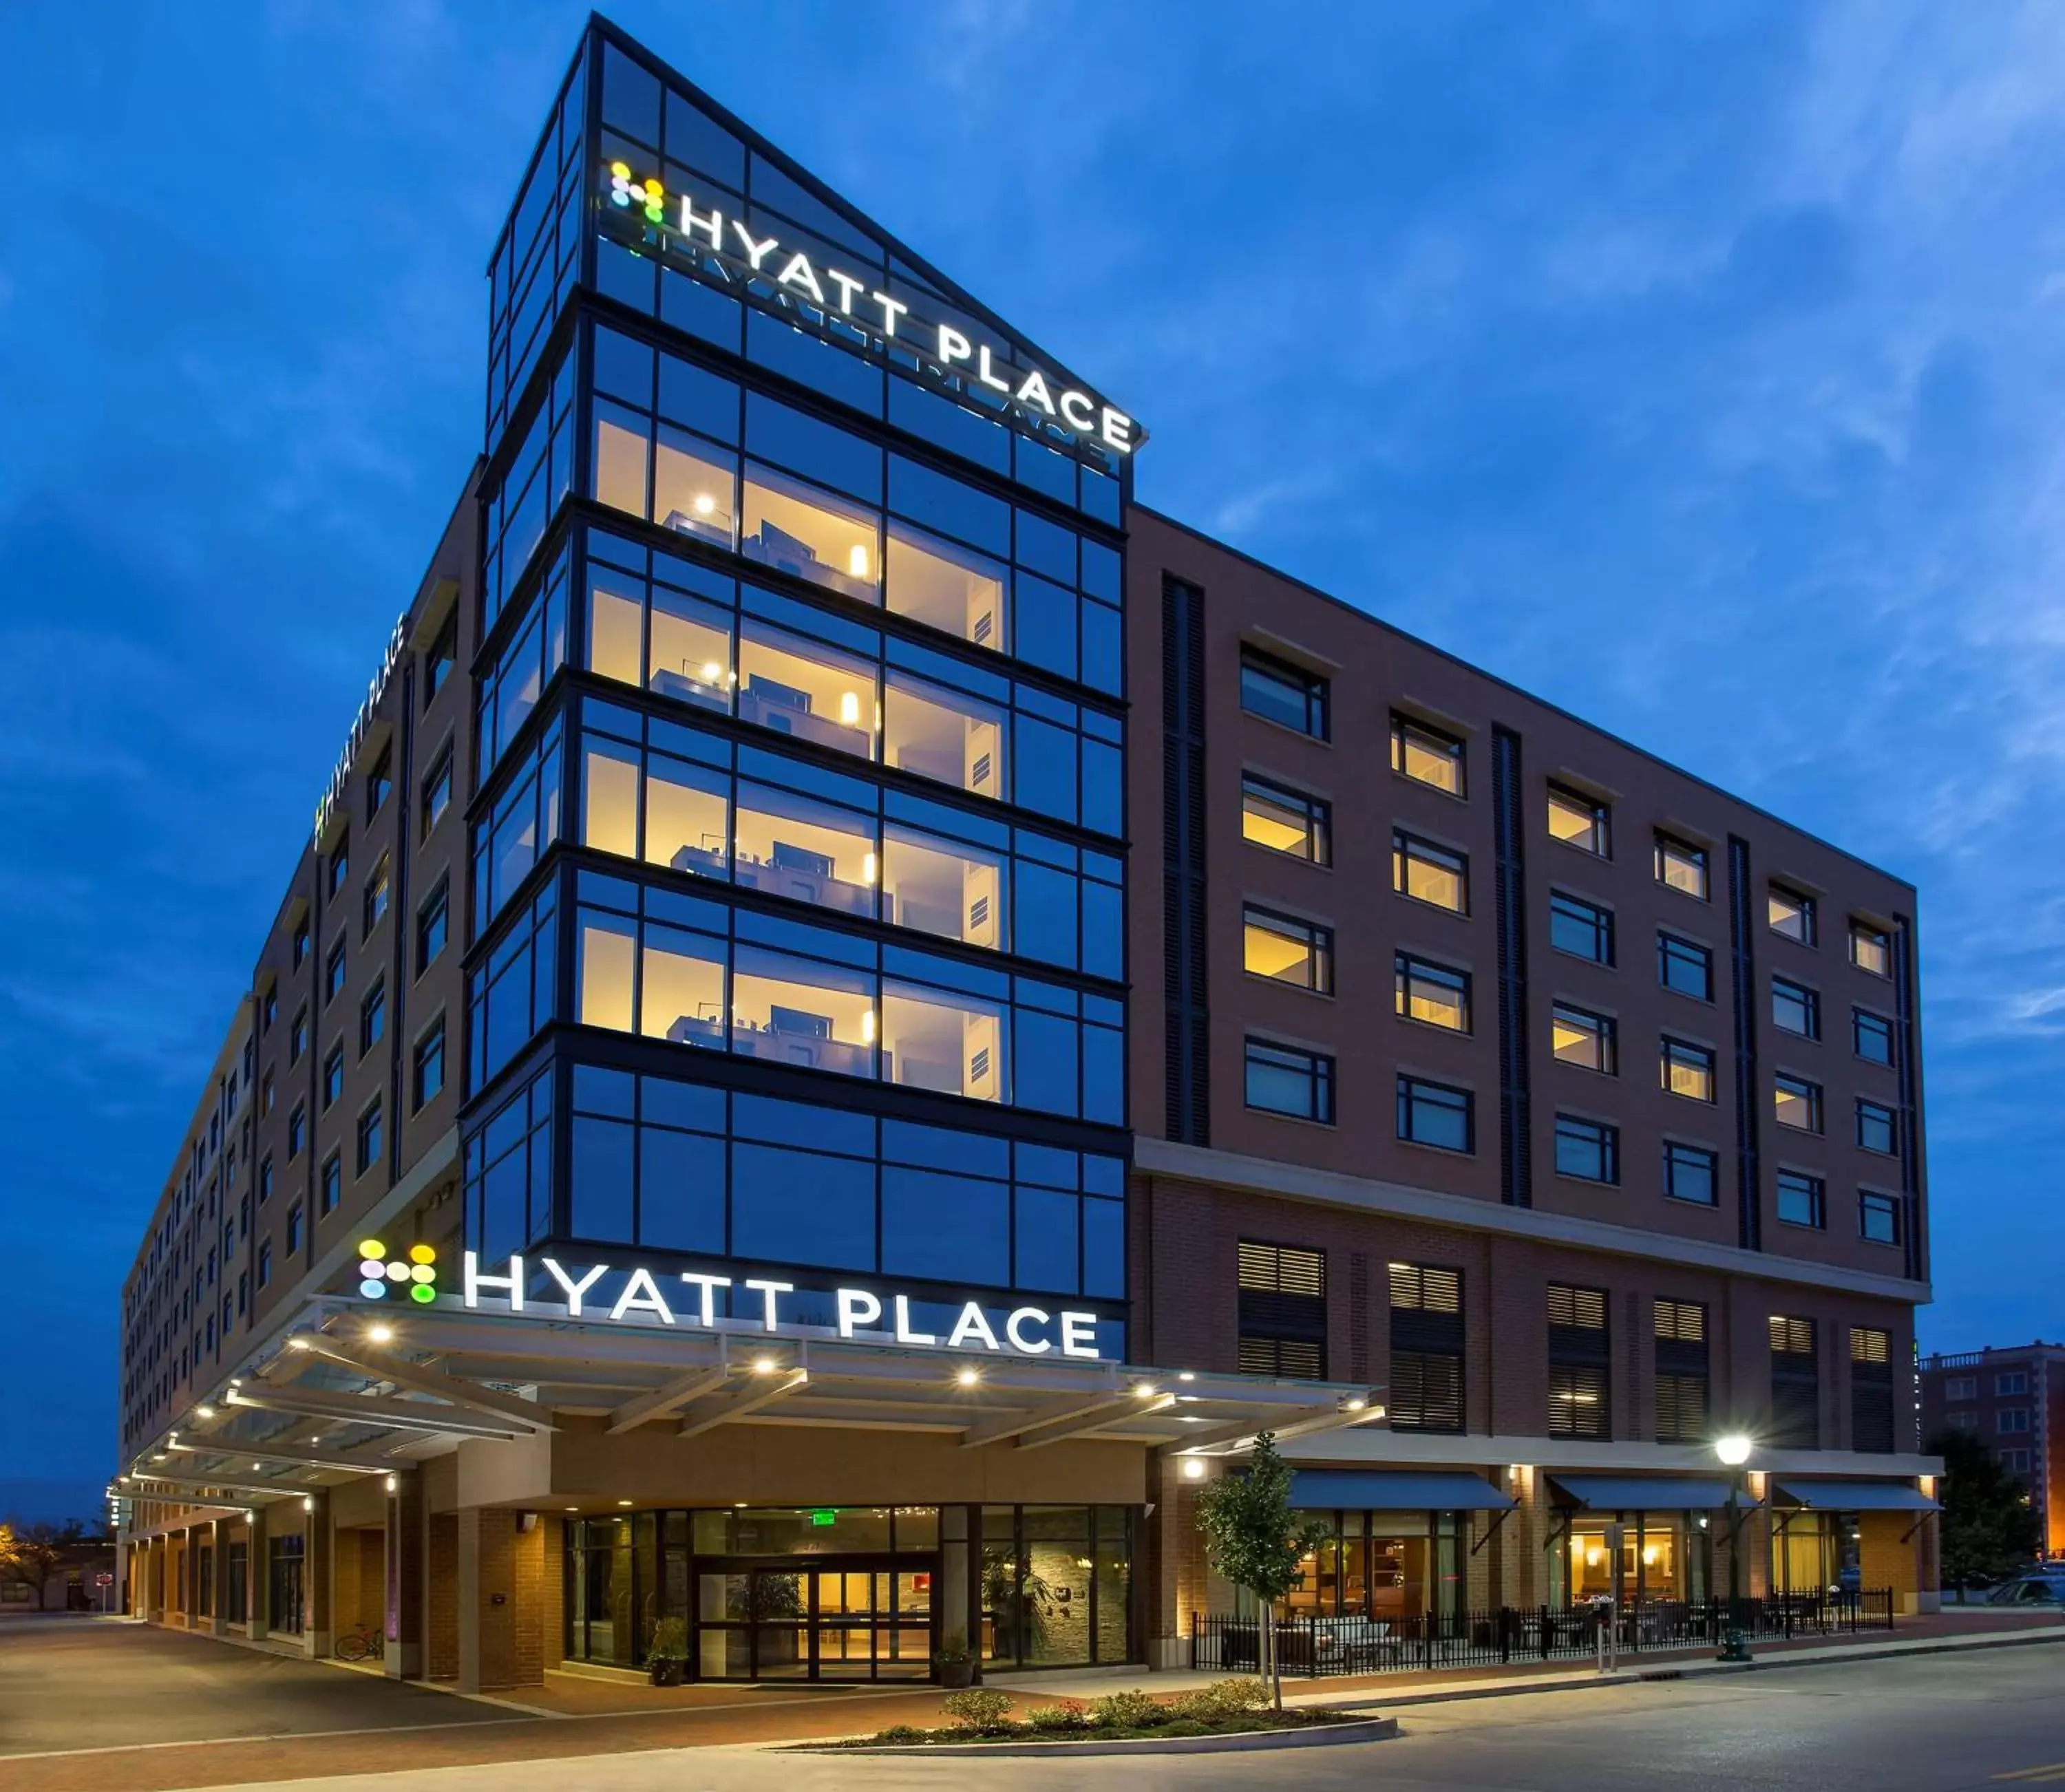 Property building in Hyatt Place Bloomington Indiana